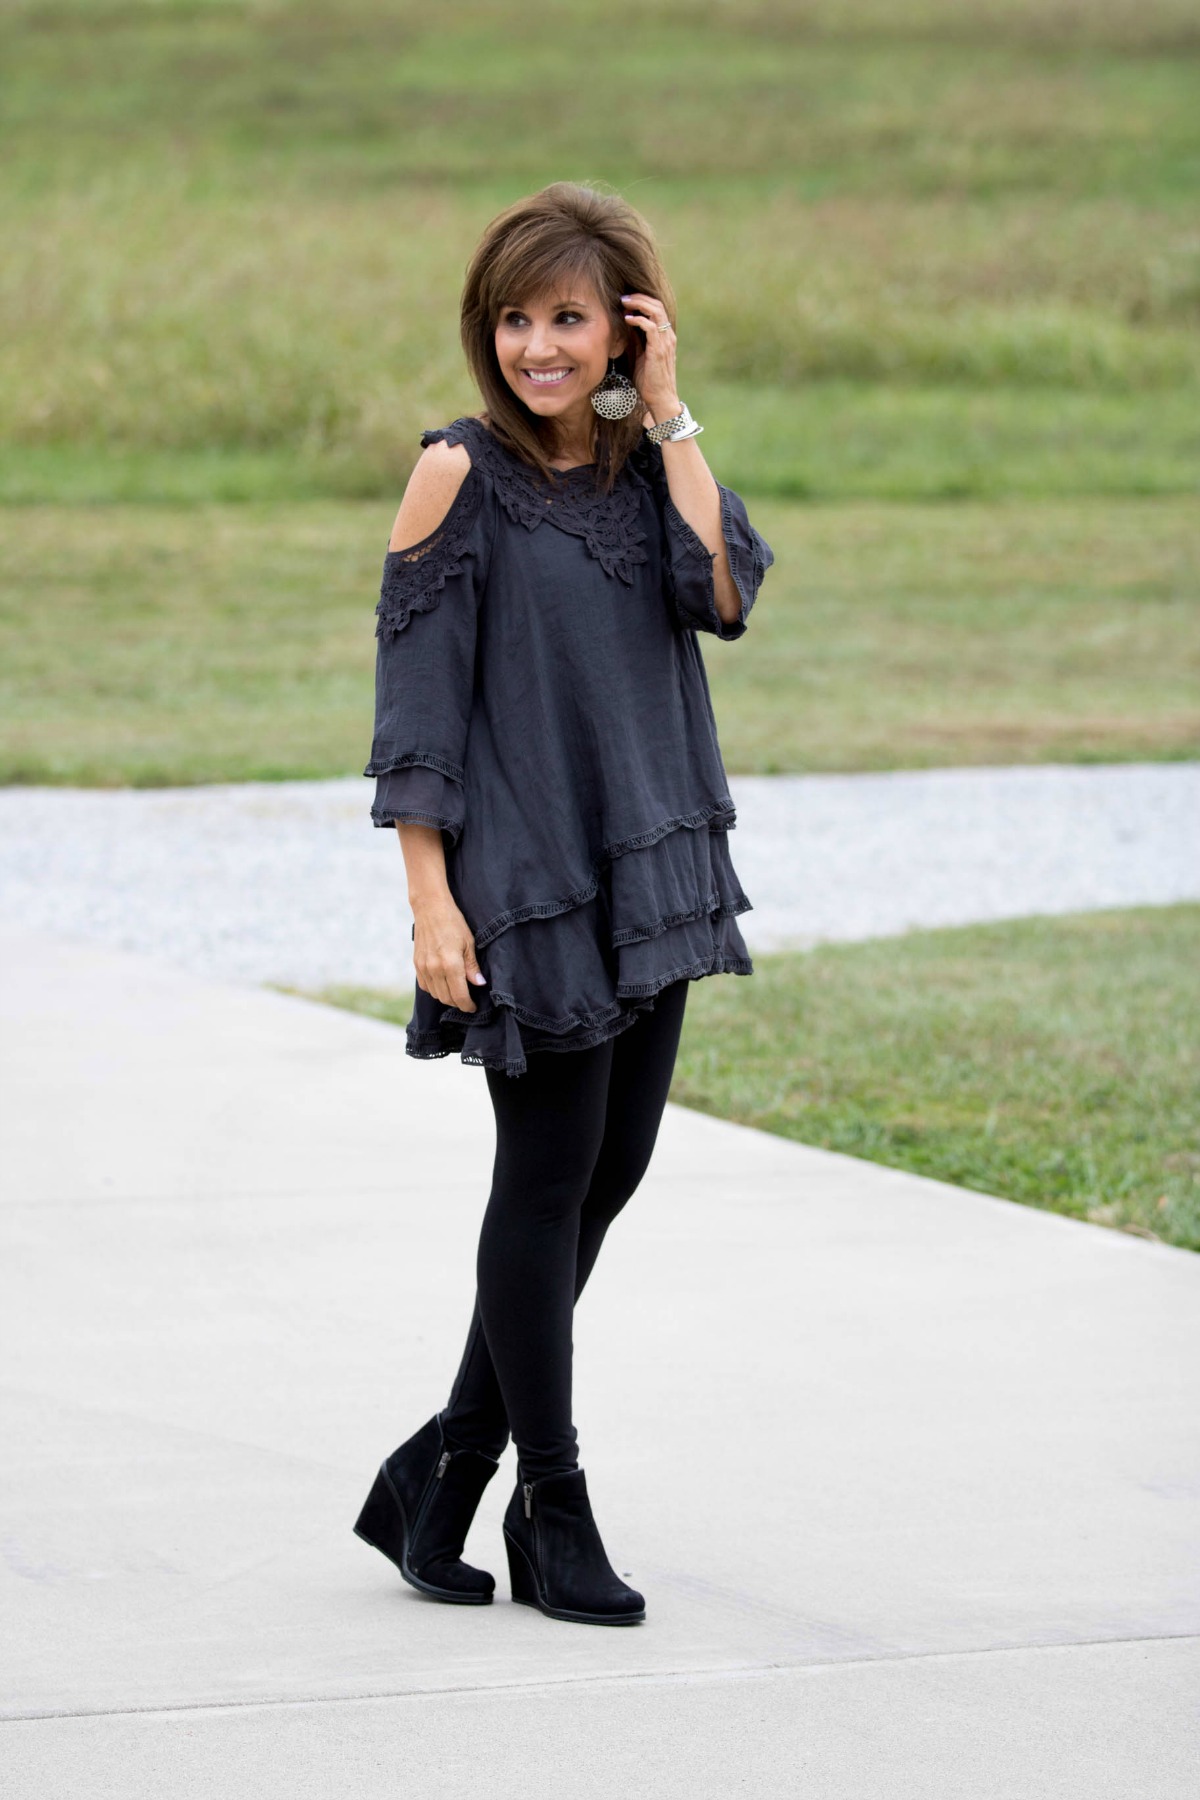 Cyndi is wearing a cold shoulder lace tunic for fall